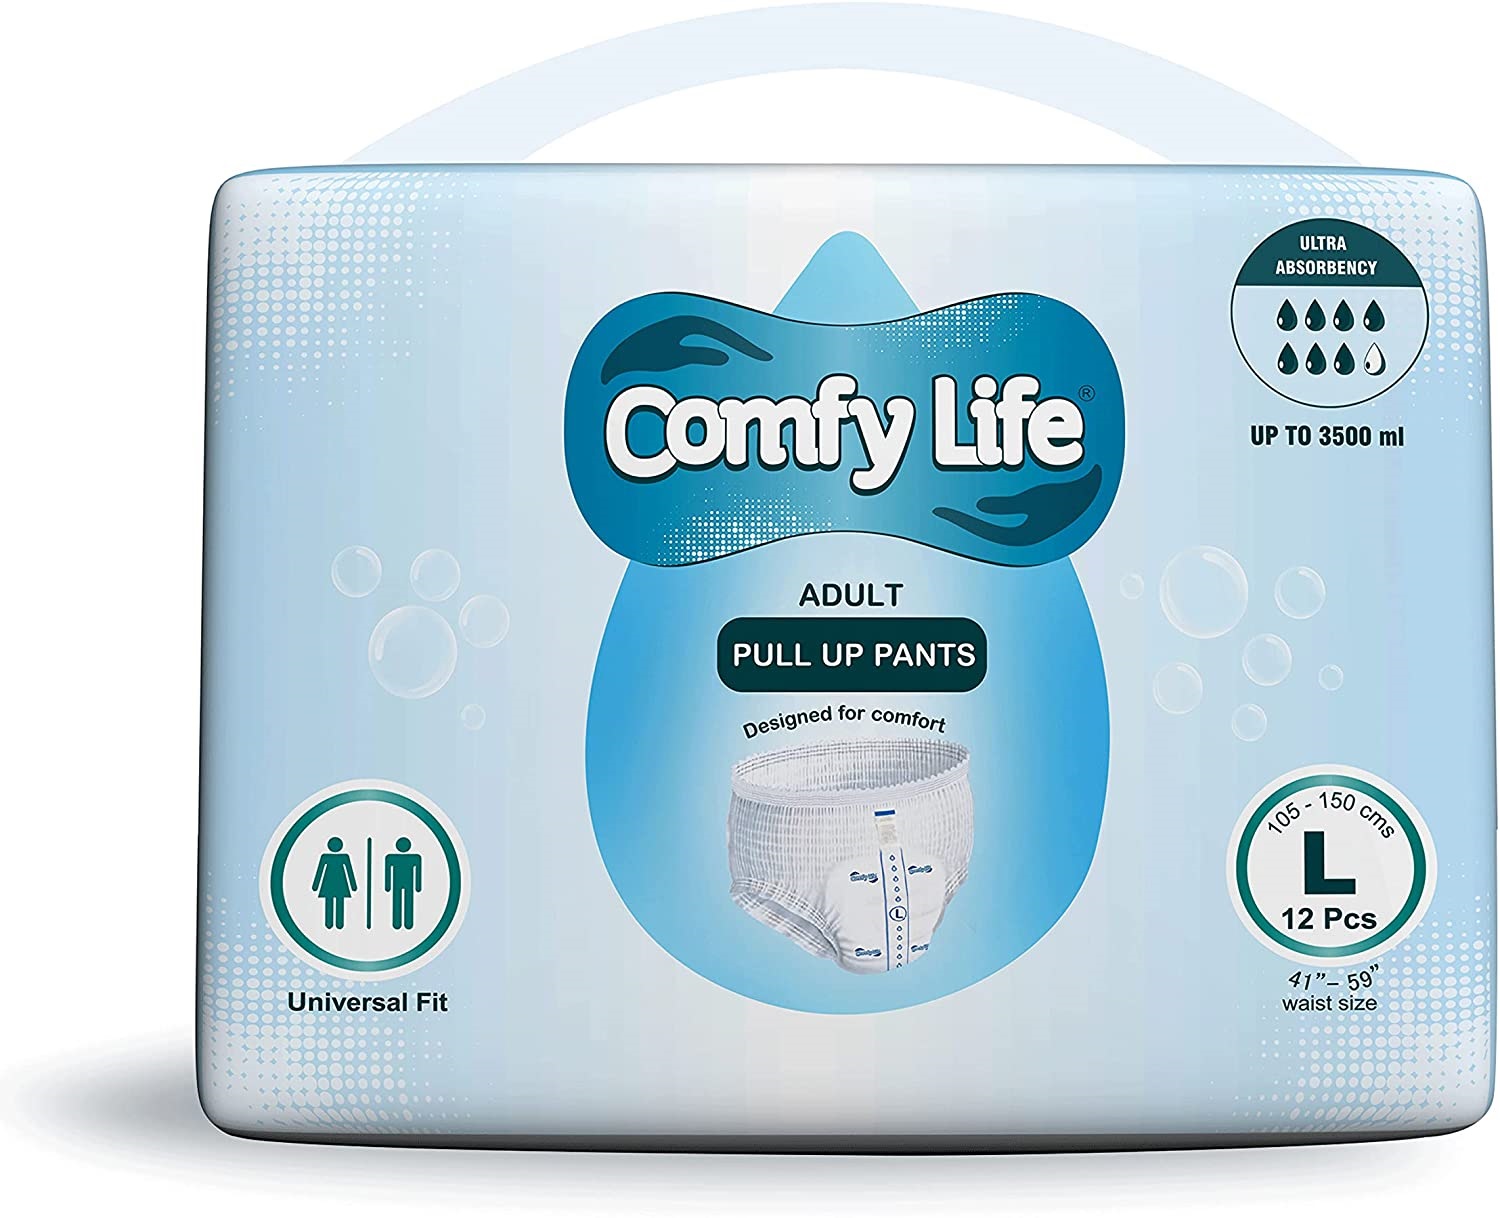 Comfy Life Premium Adulte Incontinence Pull Up